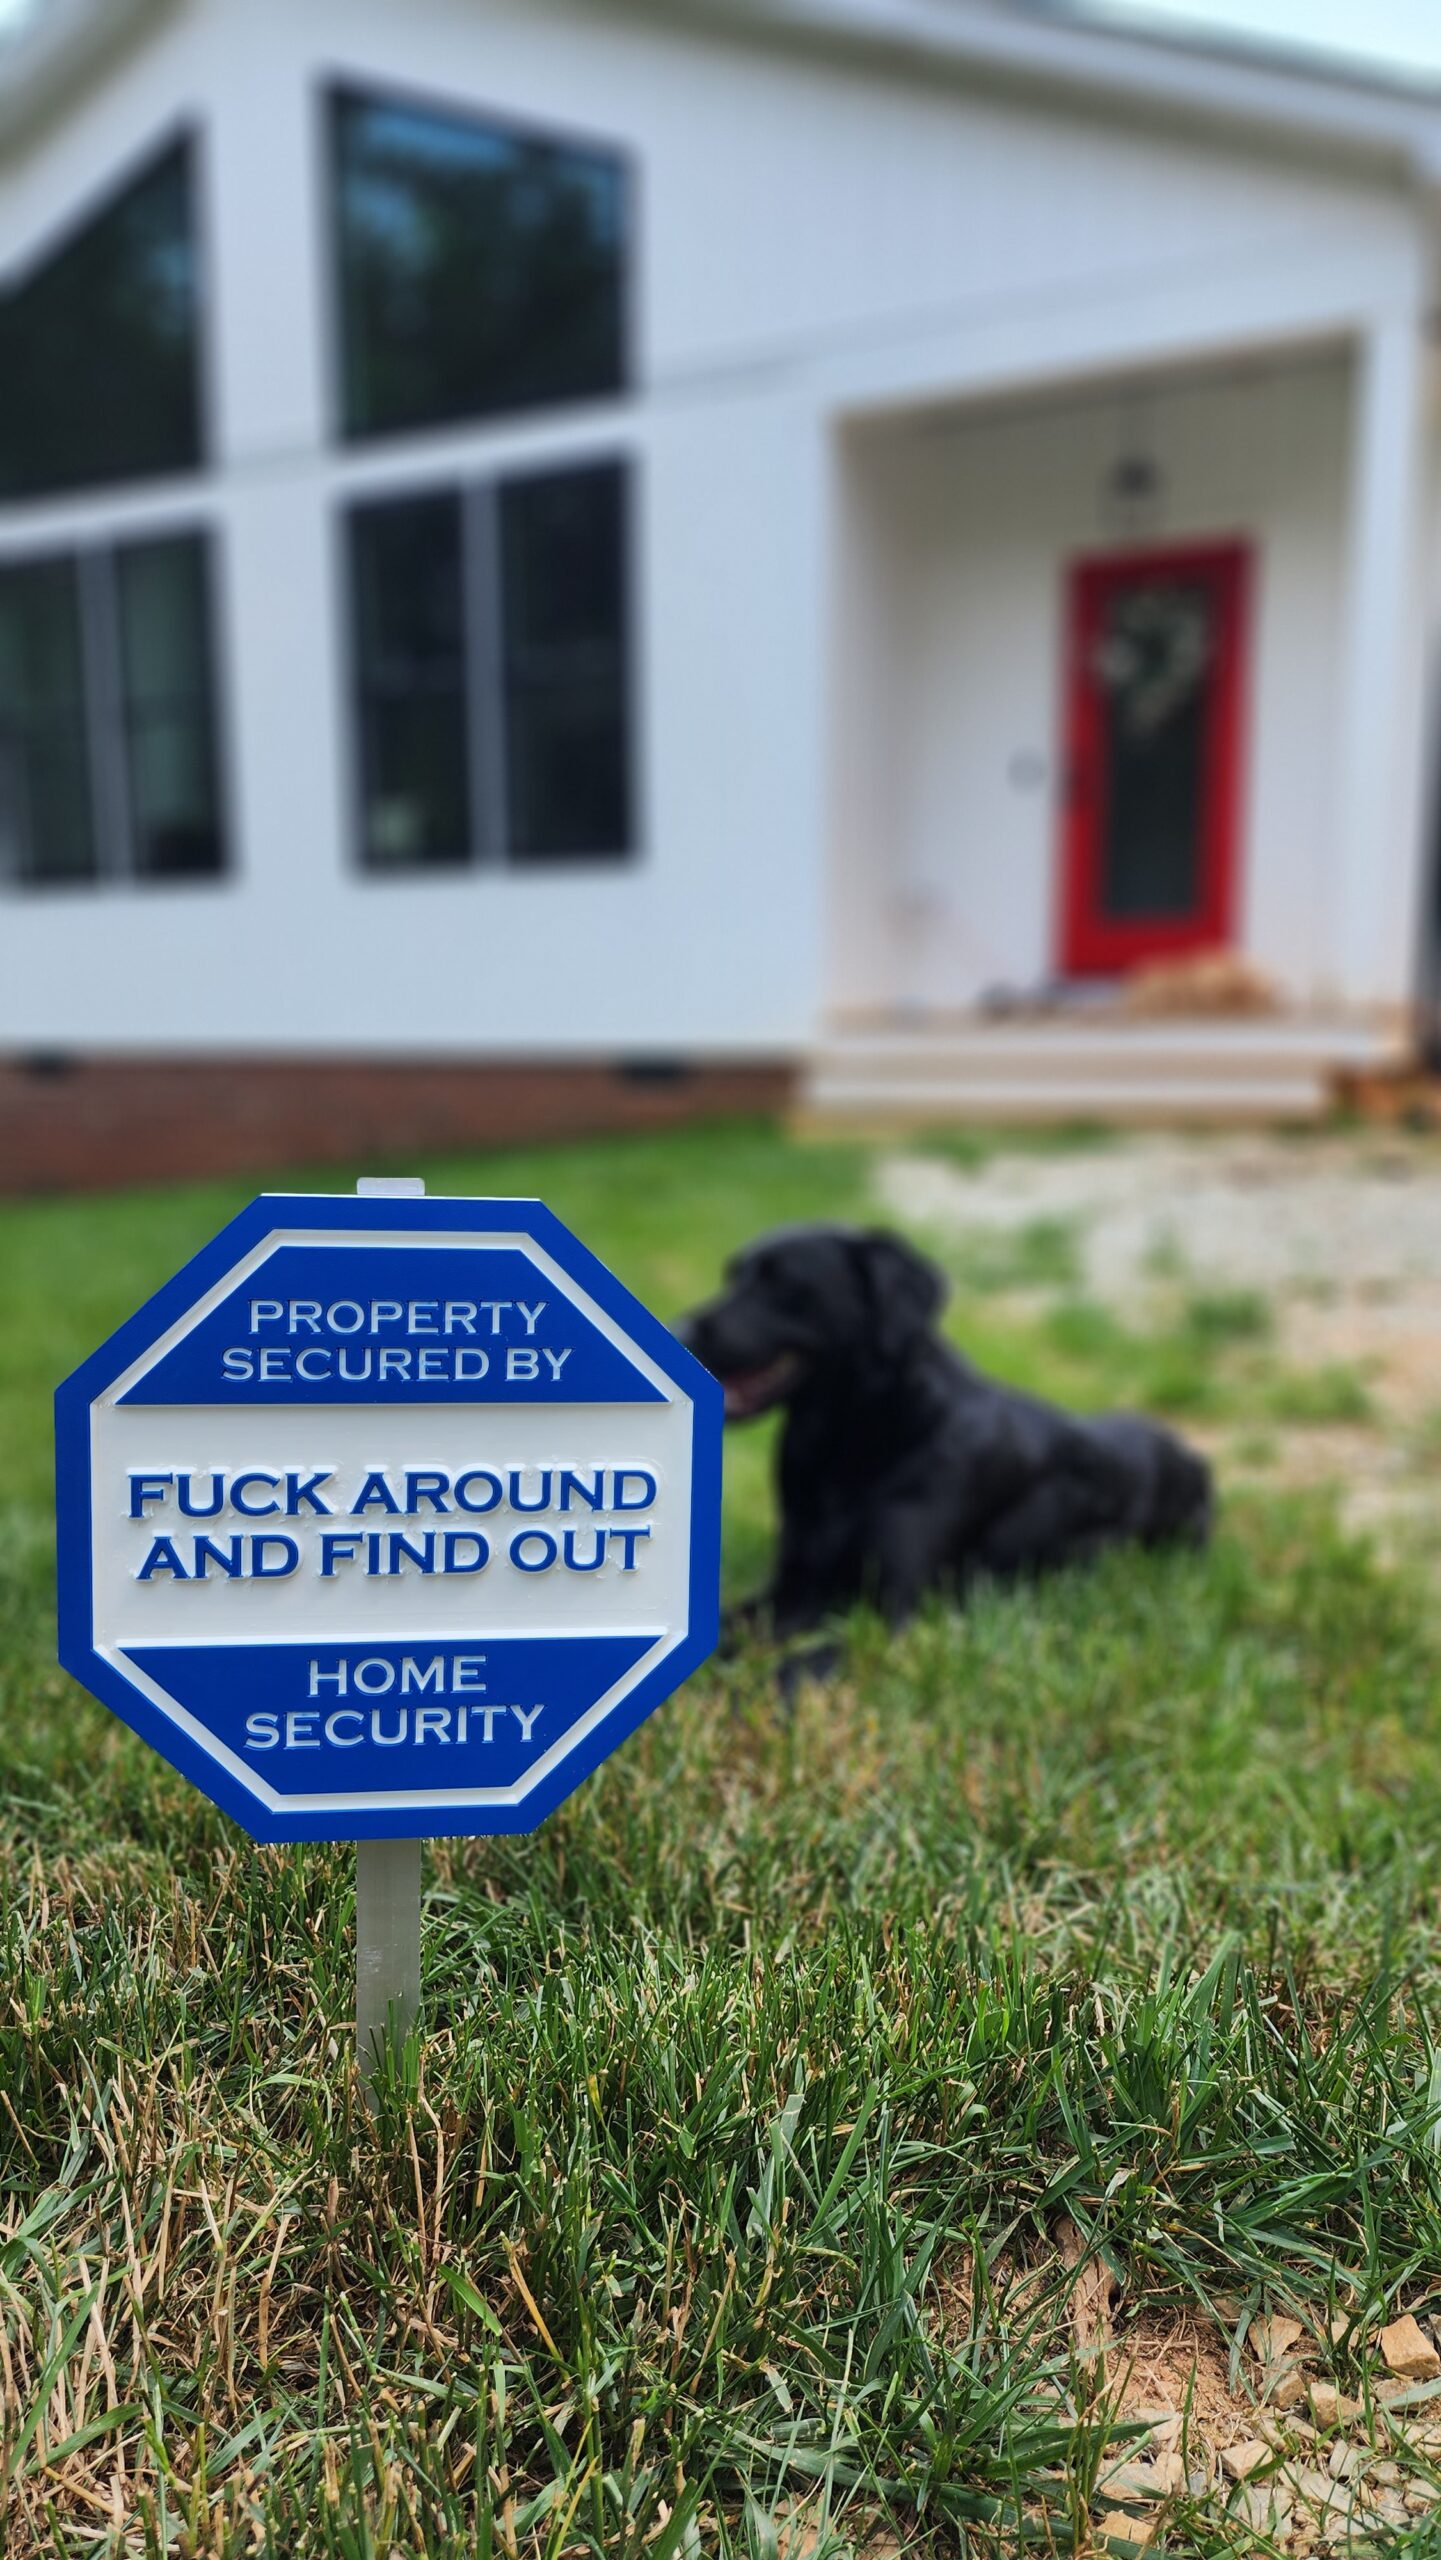 ‘FUCK AROUND AND FIND OUT’ SIGN